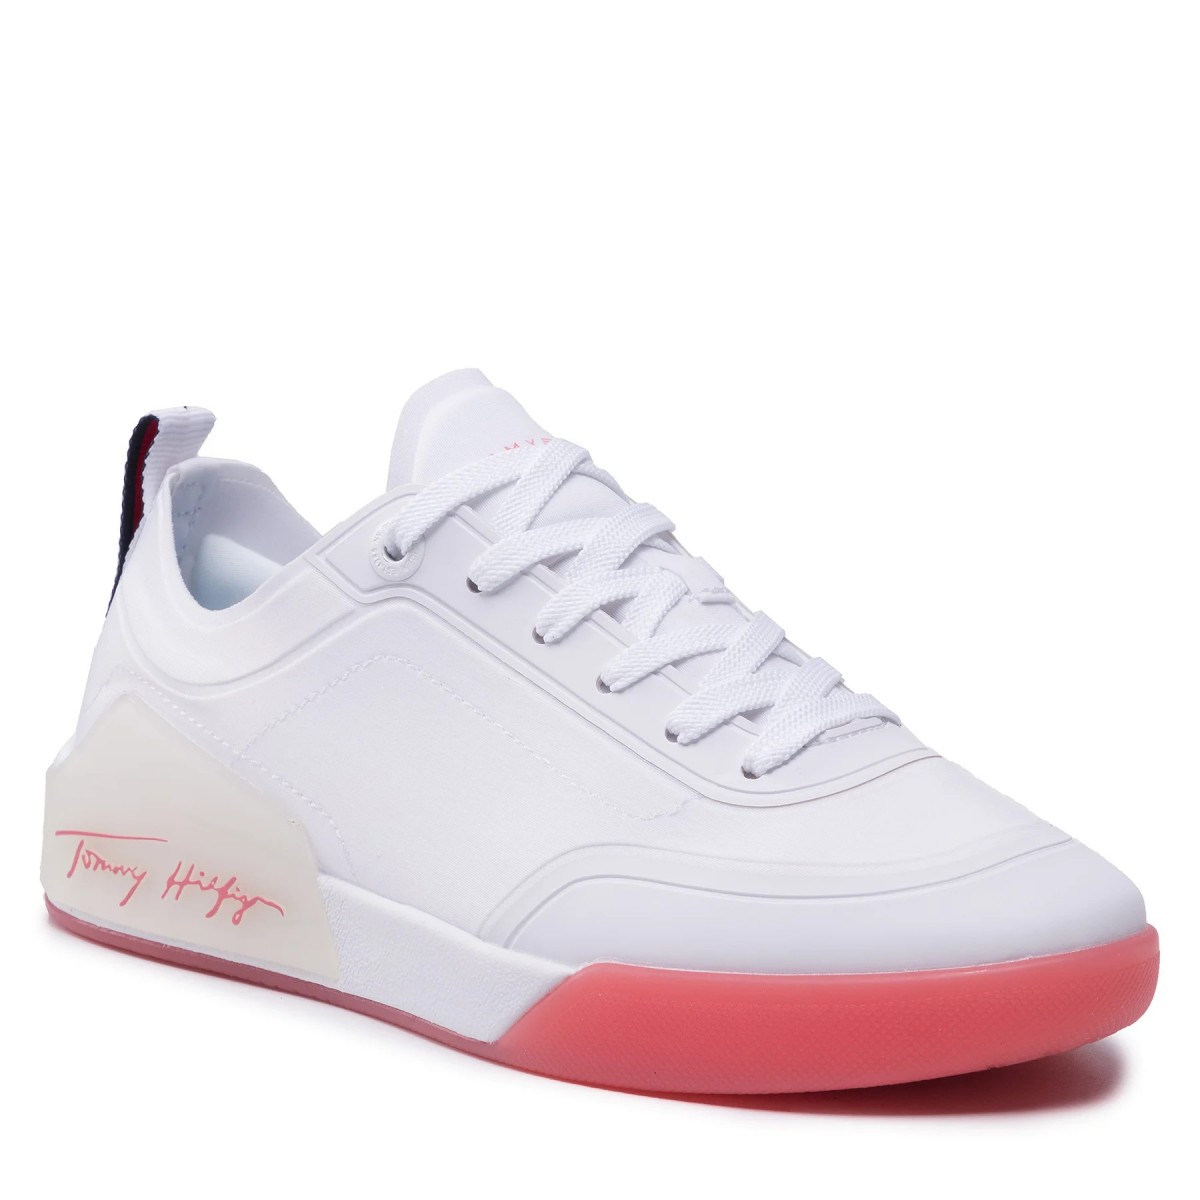 Sneakers femme TOMMY HILFIGER Elevated Crystal rose/blanc - Matière noble  59,00€